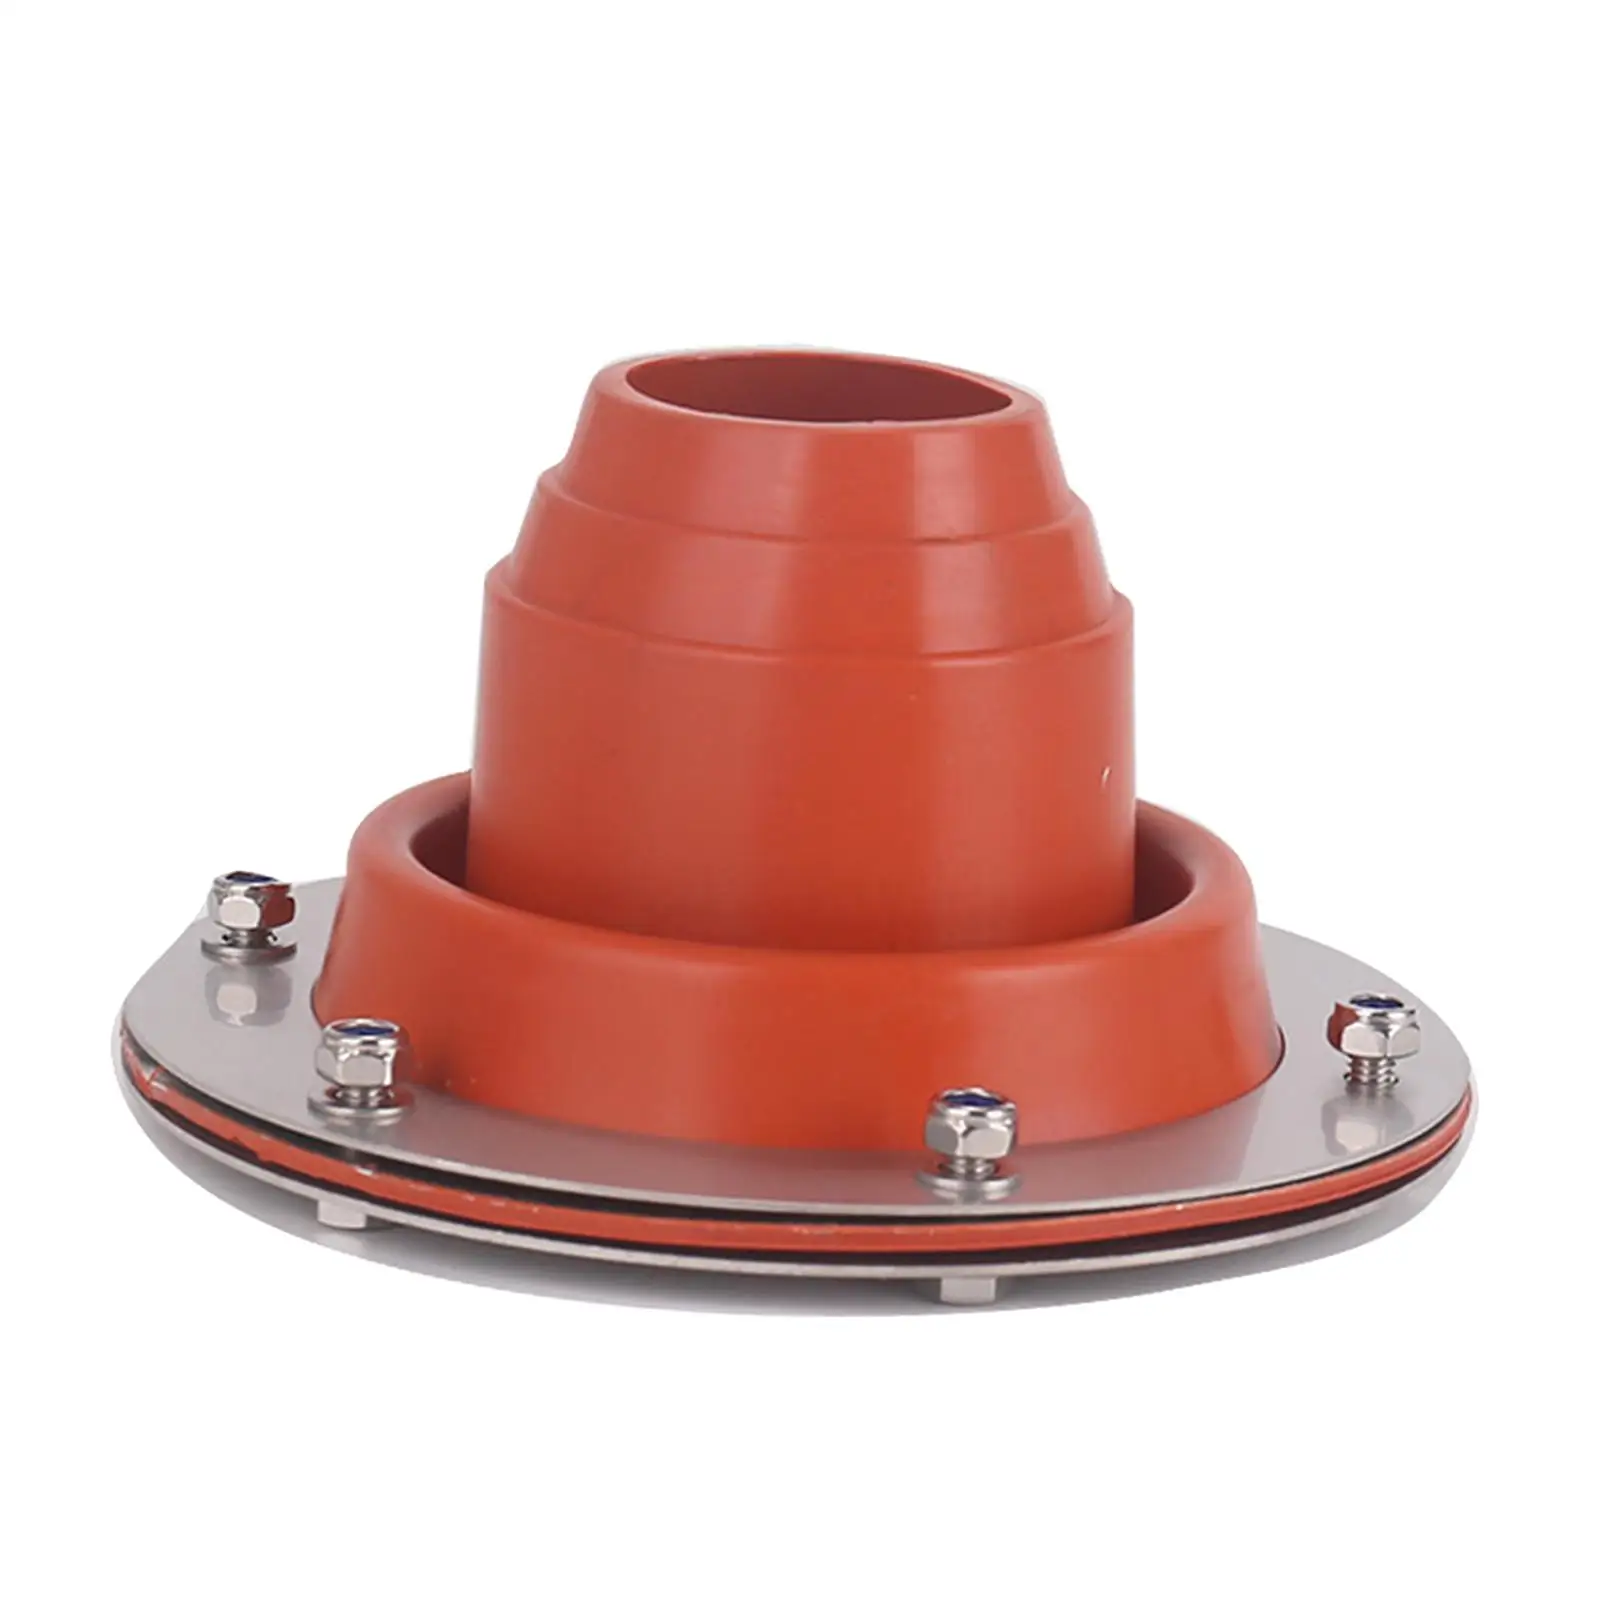 Tent Stove Jack Pipe Vent Silicone Tube Fire Resistant Keep Your Use Of Hot Flue Pipes Safe and Secure